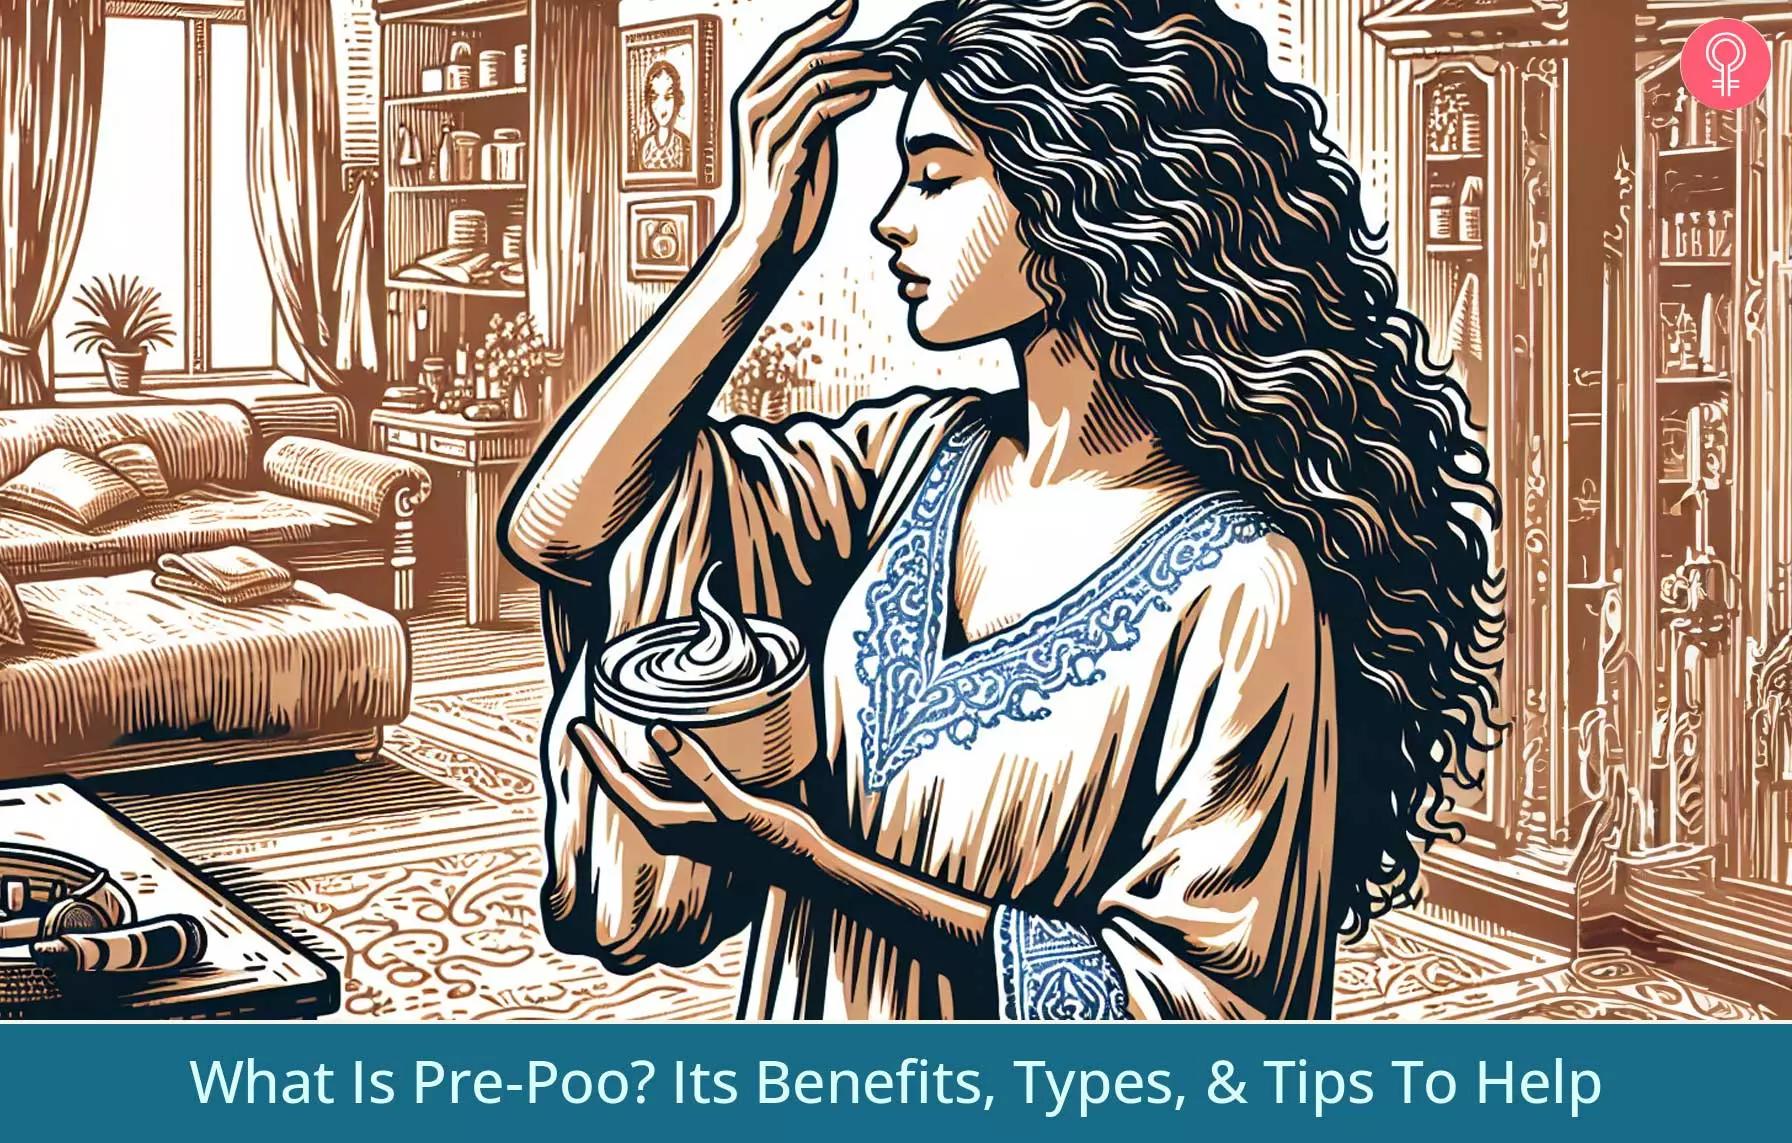 What Is Pre-Poo? Its Benefits, Types, & Tips To Help